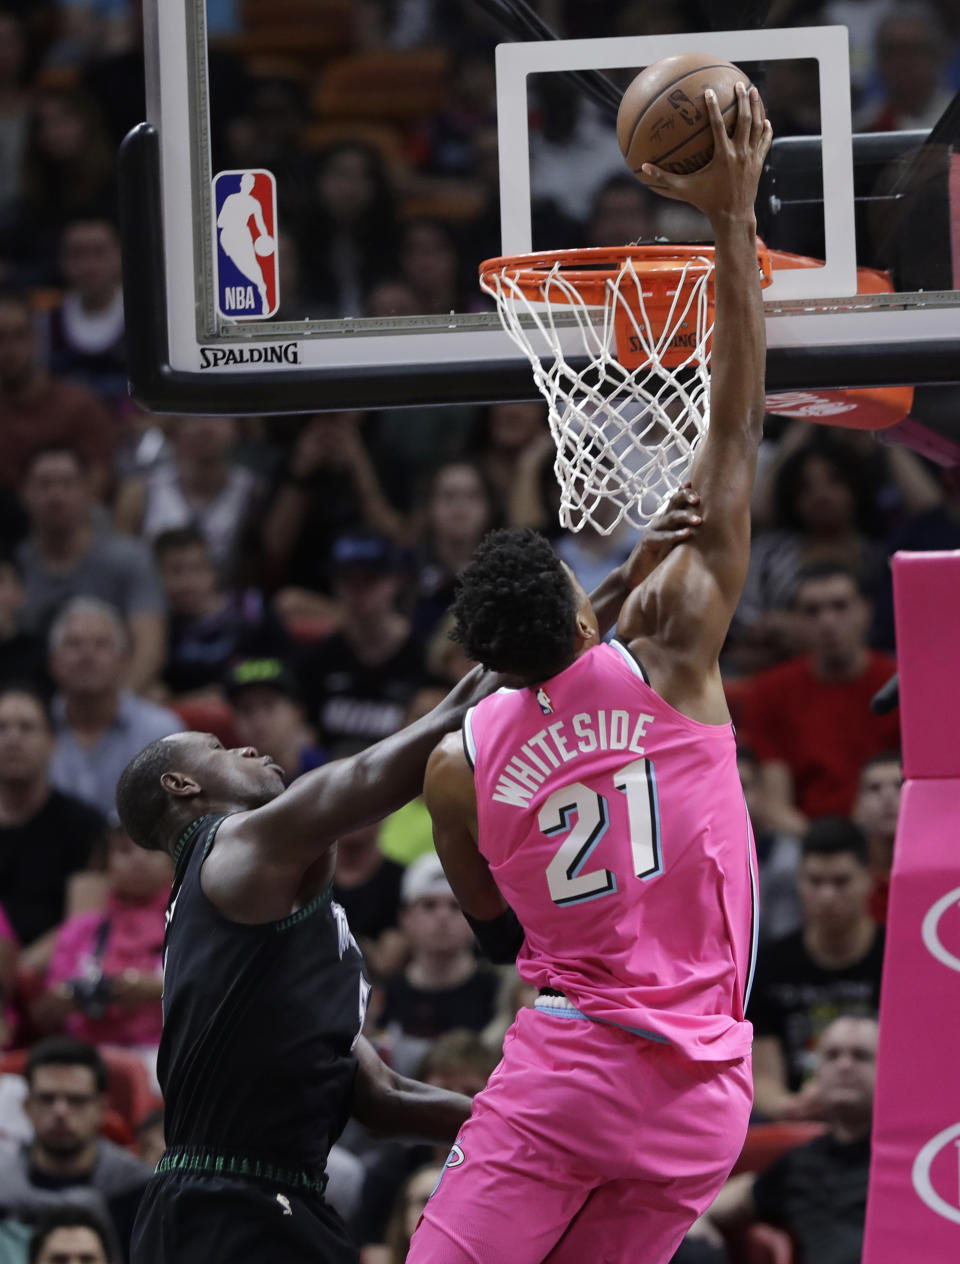 Miami Heat center Hassan Whiteside (21) shoots over Minnesota Timberwolves center Gorgui Dieng during the first half of an NBA basketball game, Sunday, Dec. 30, 2018, in Miami. (AP Photo/Lynne Sladky)